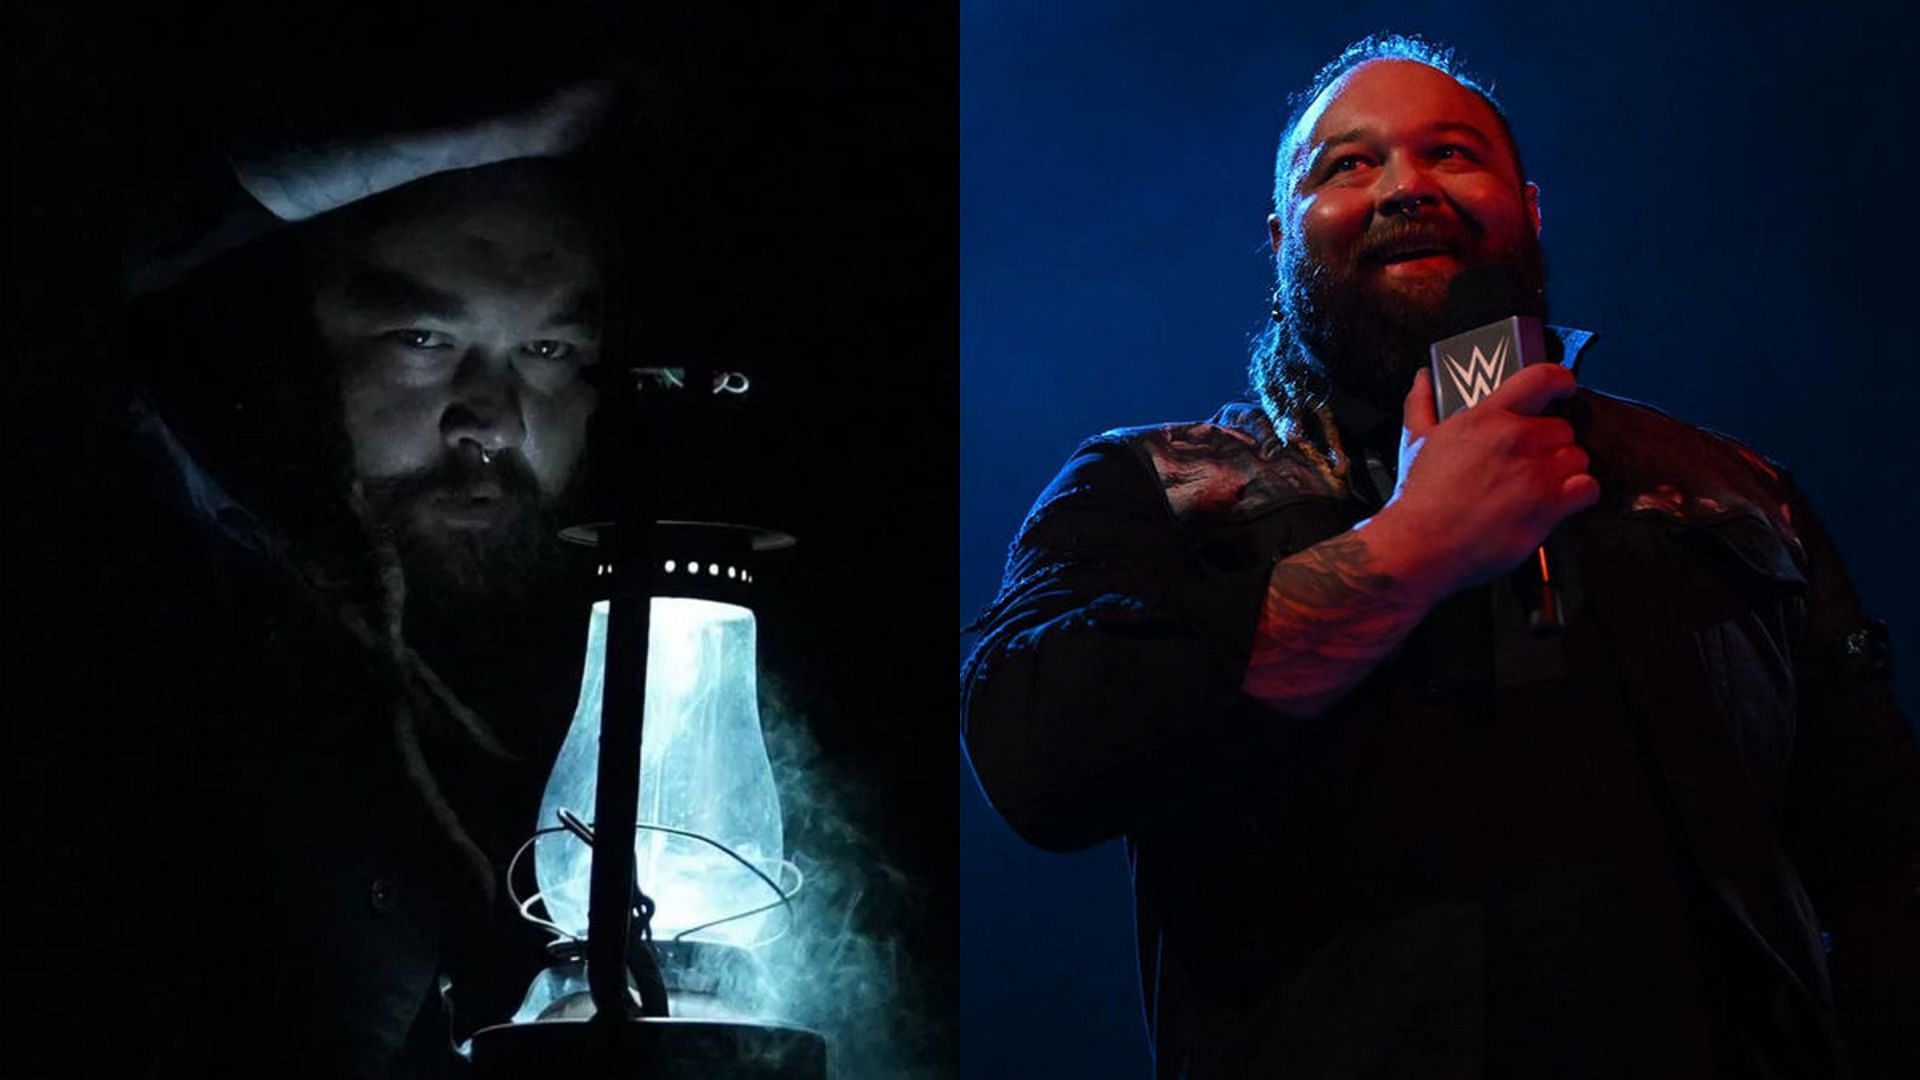 Bray Wyatt returned to WWE last October at Extreme Rules